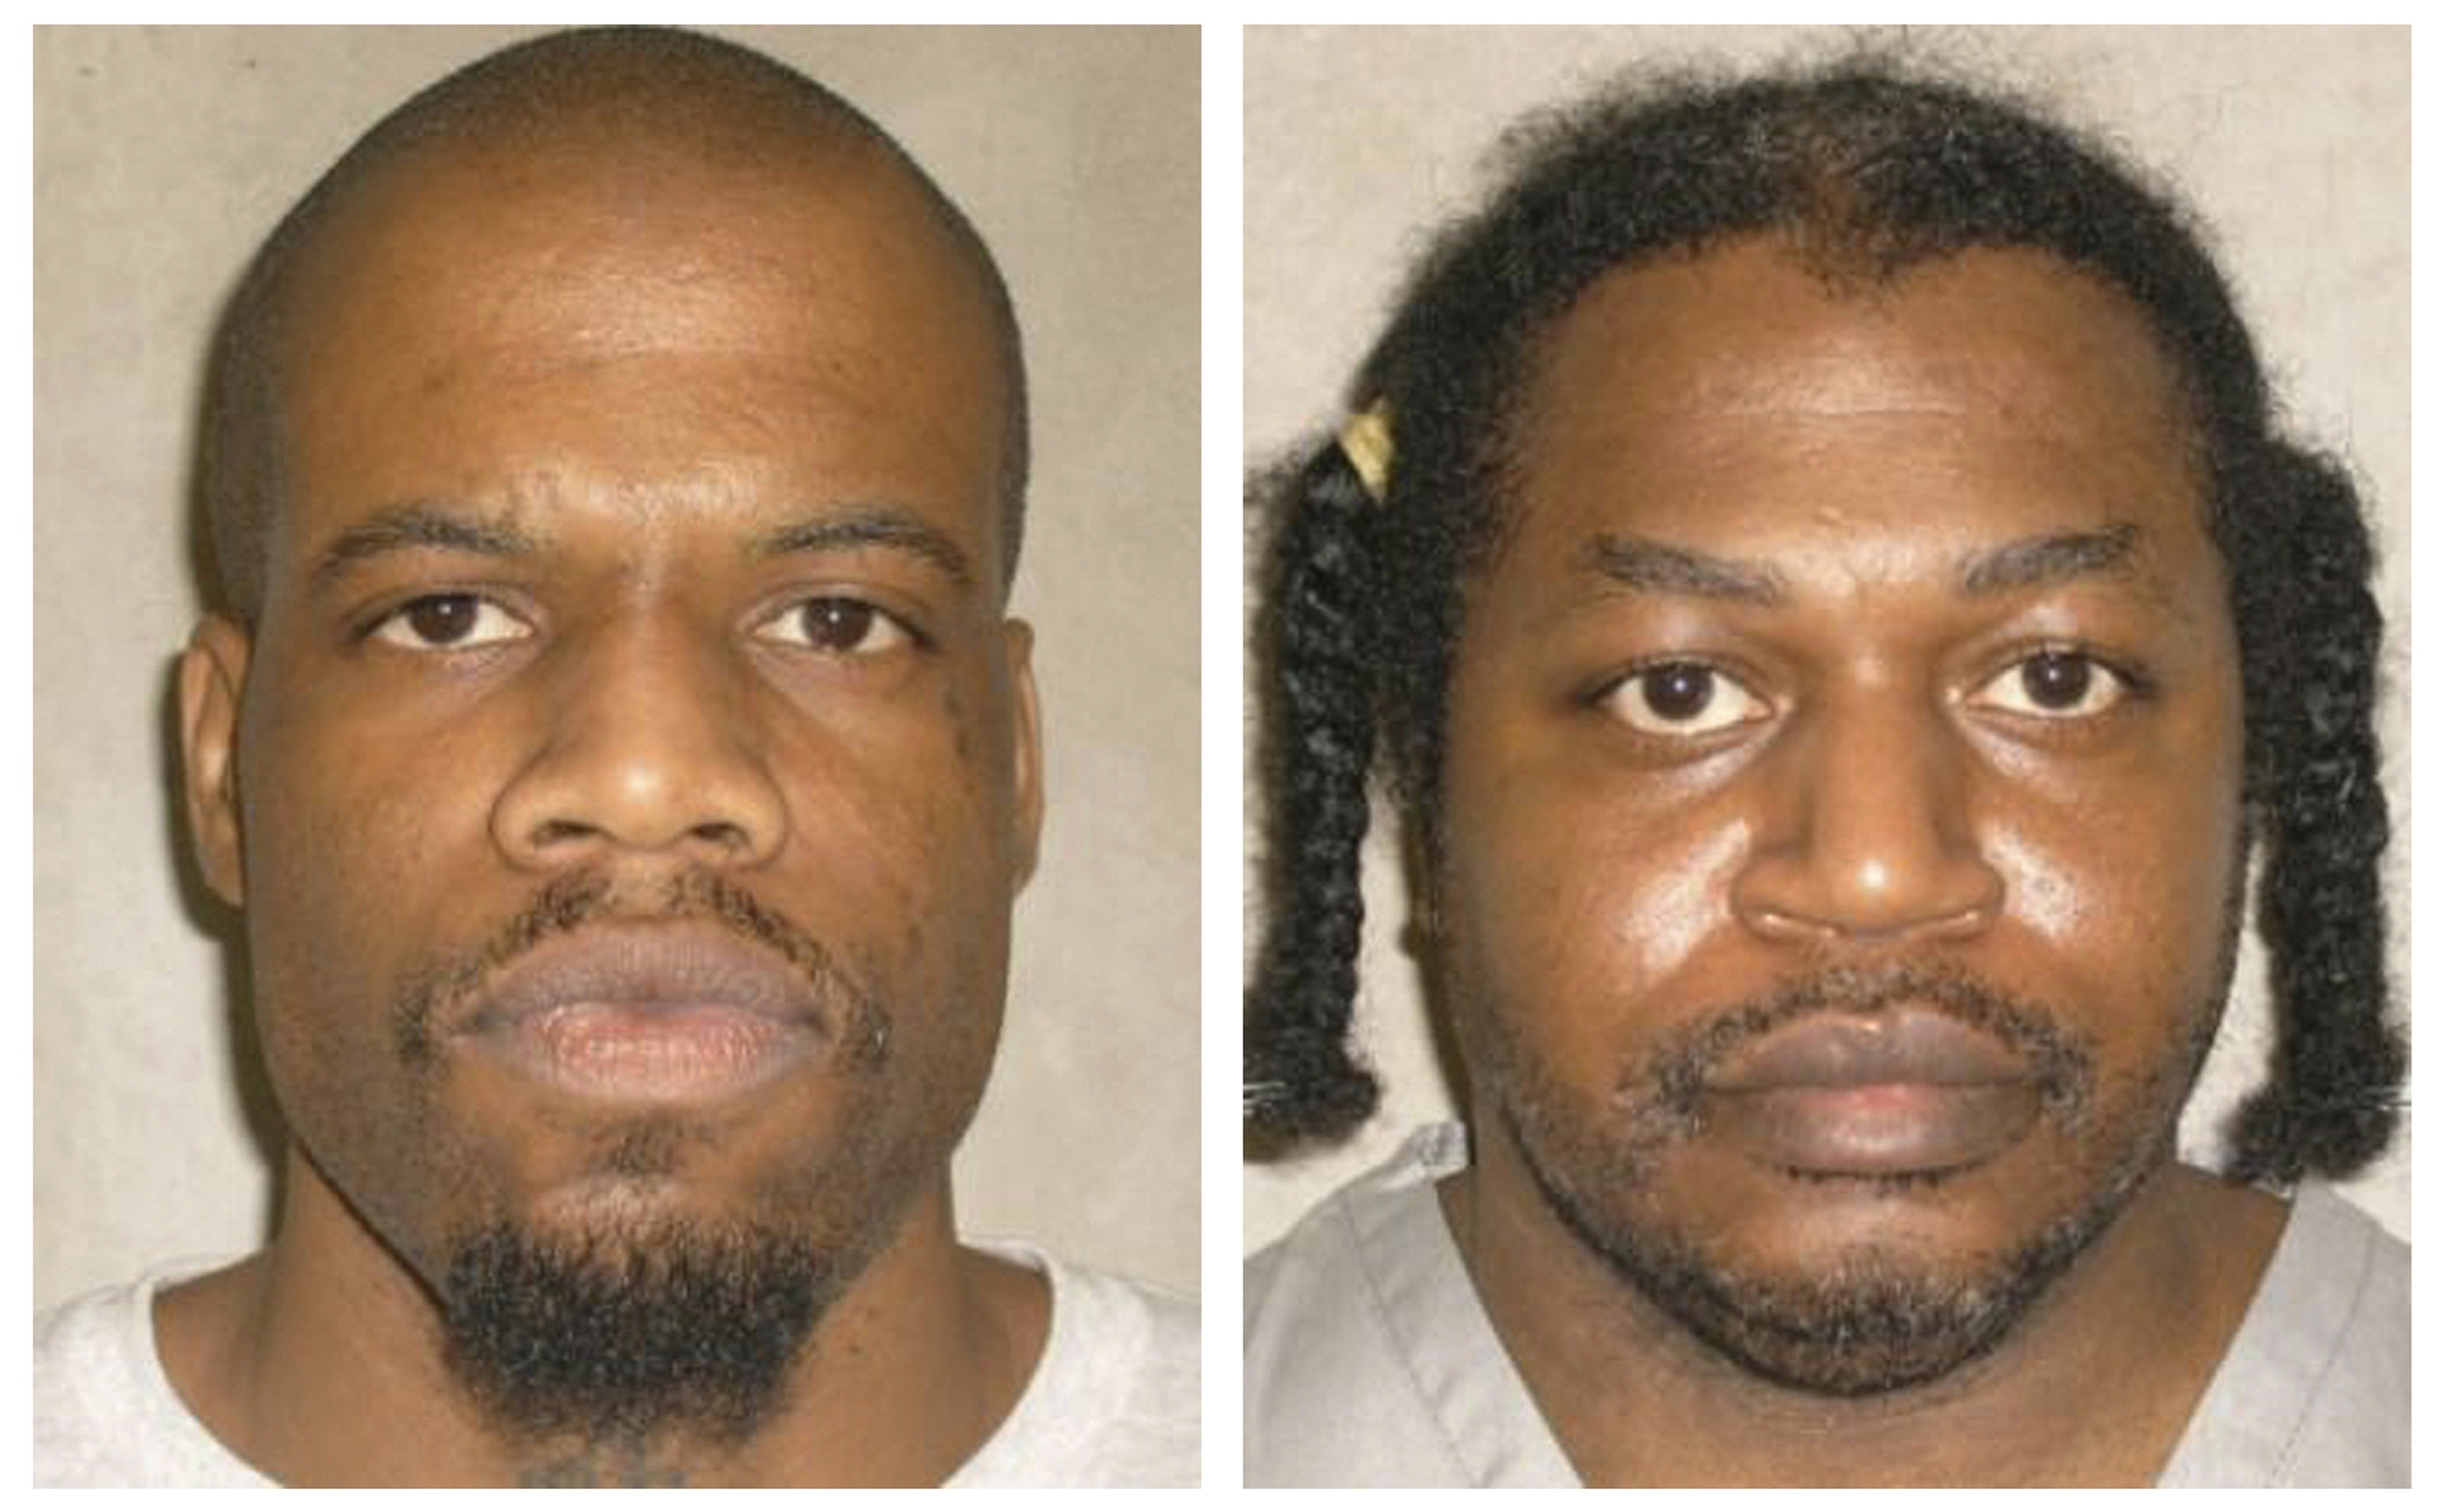 Death row inmates Charles Warner, right, and Clayton Lockett are seen in a combination of pictures from the Oklahoma Department of Corrections dated June 29, 2011. (Oklahoma Department of Corrections/Reuters)